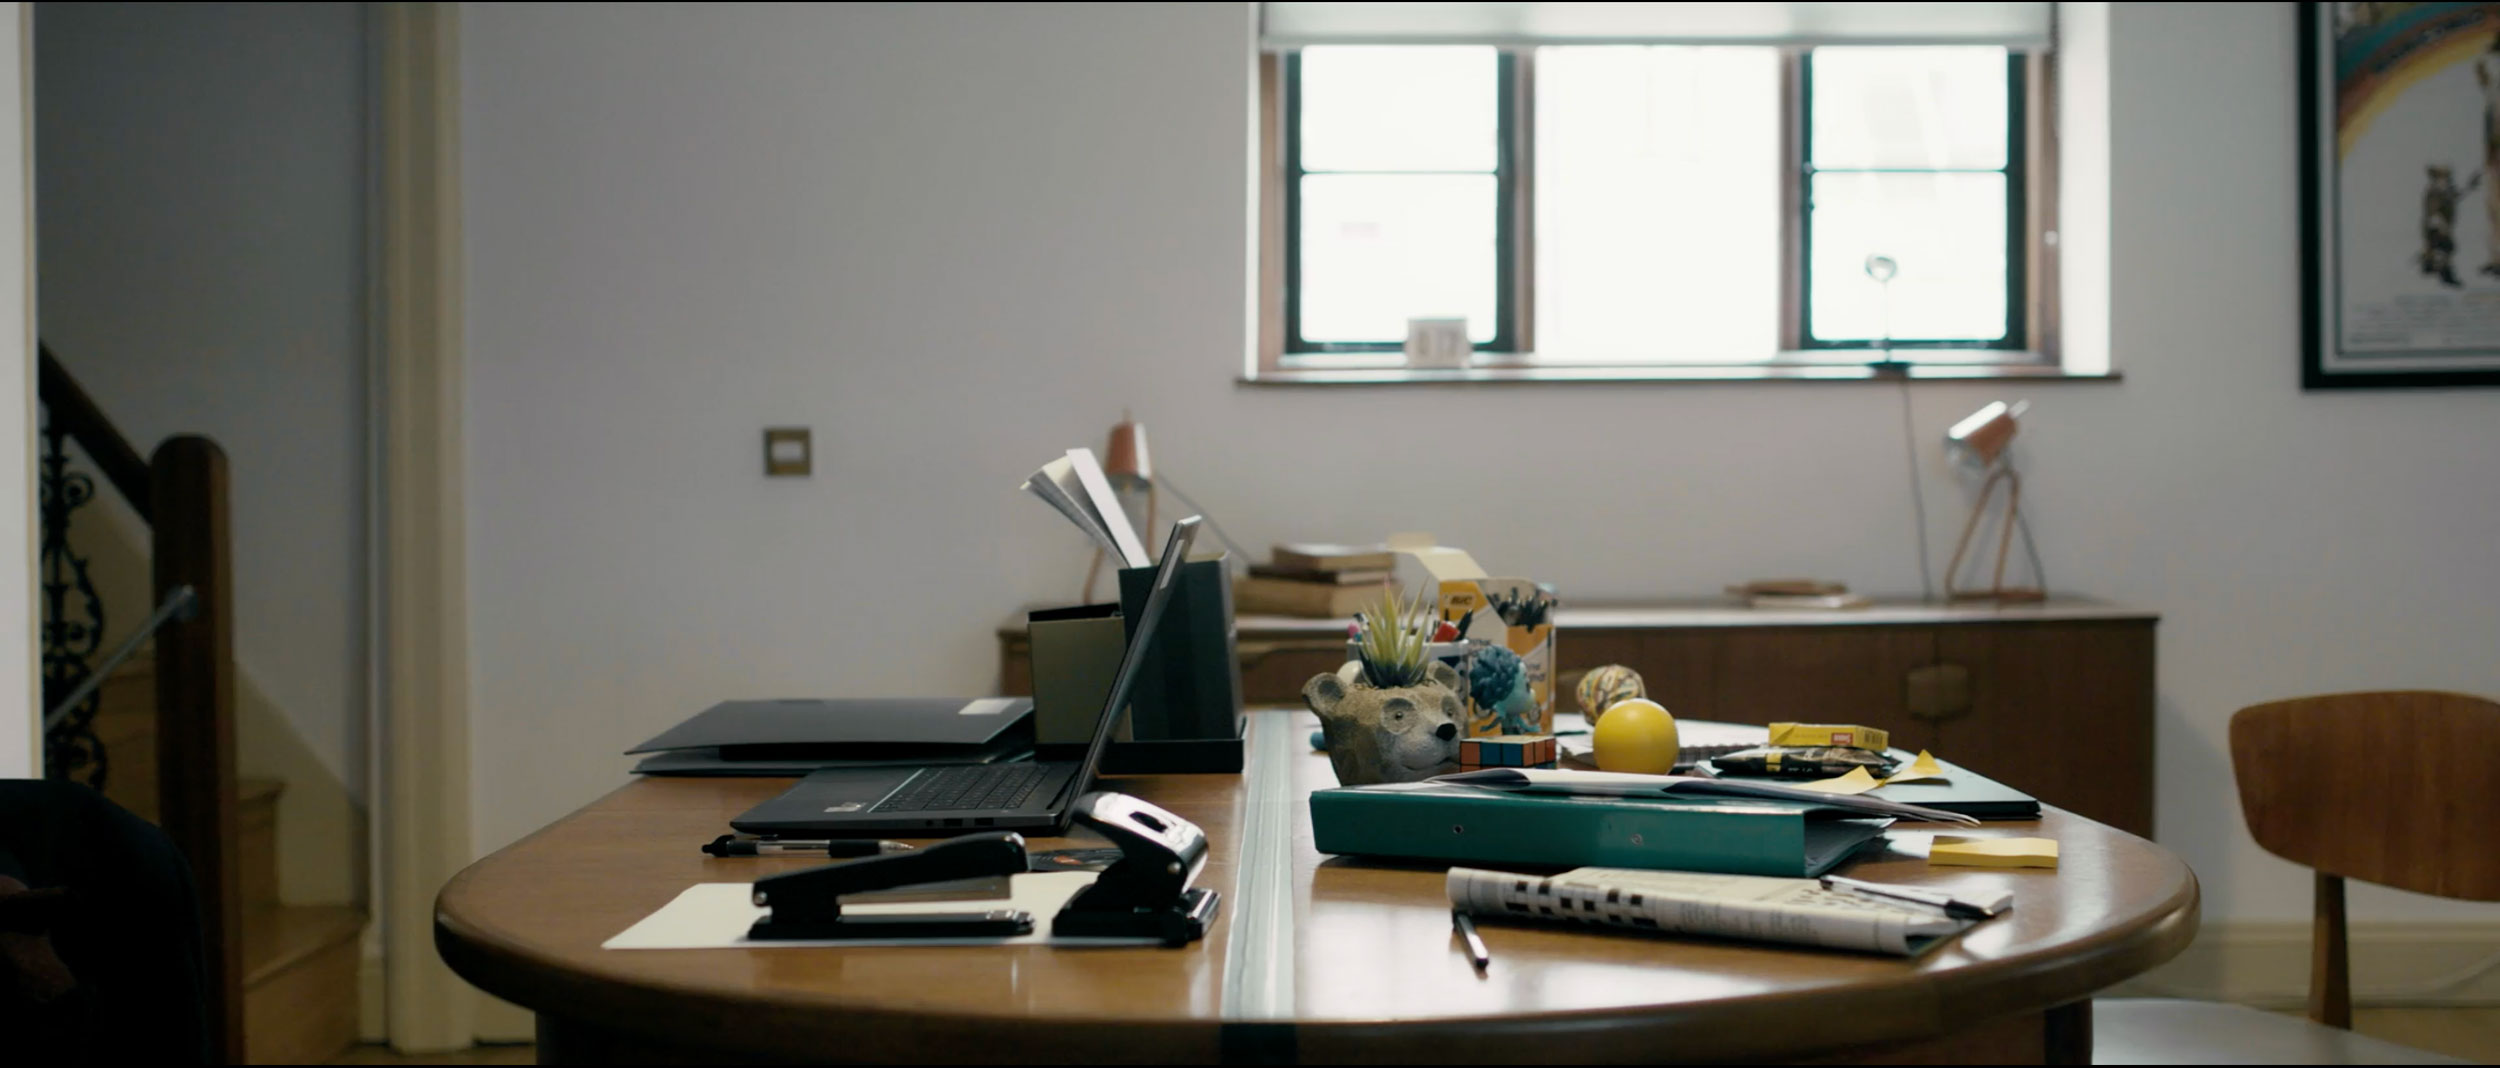 Still from Working Title directed by Lewis Cliff featuring a table with a laptop and office stationery